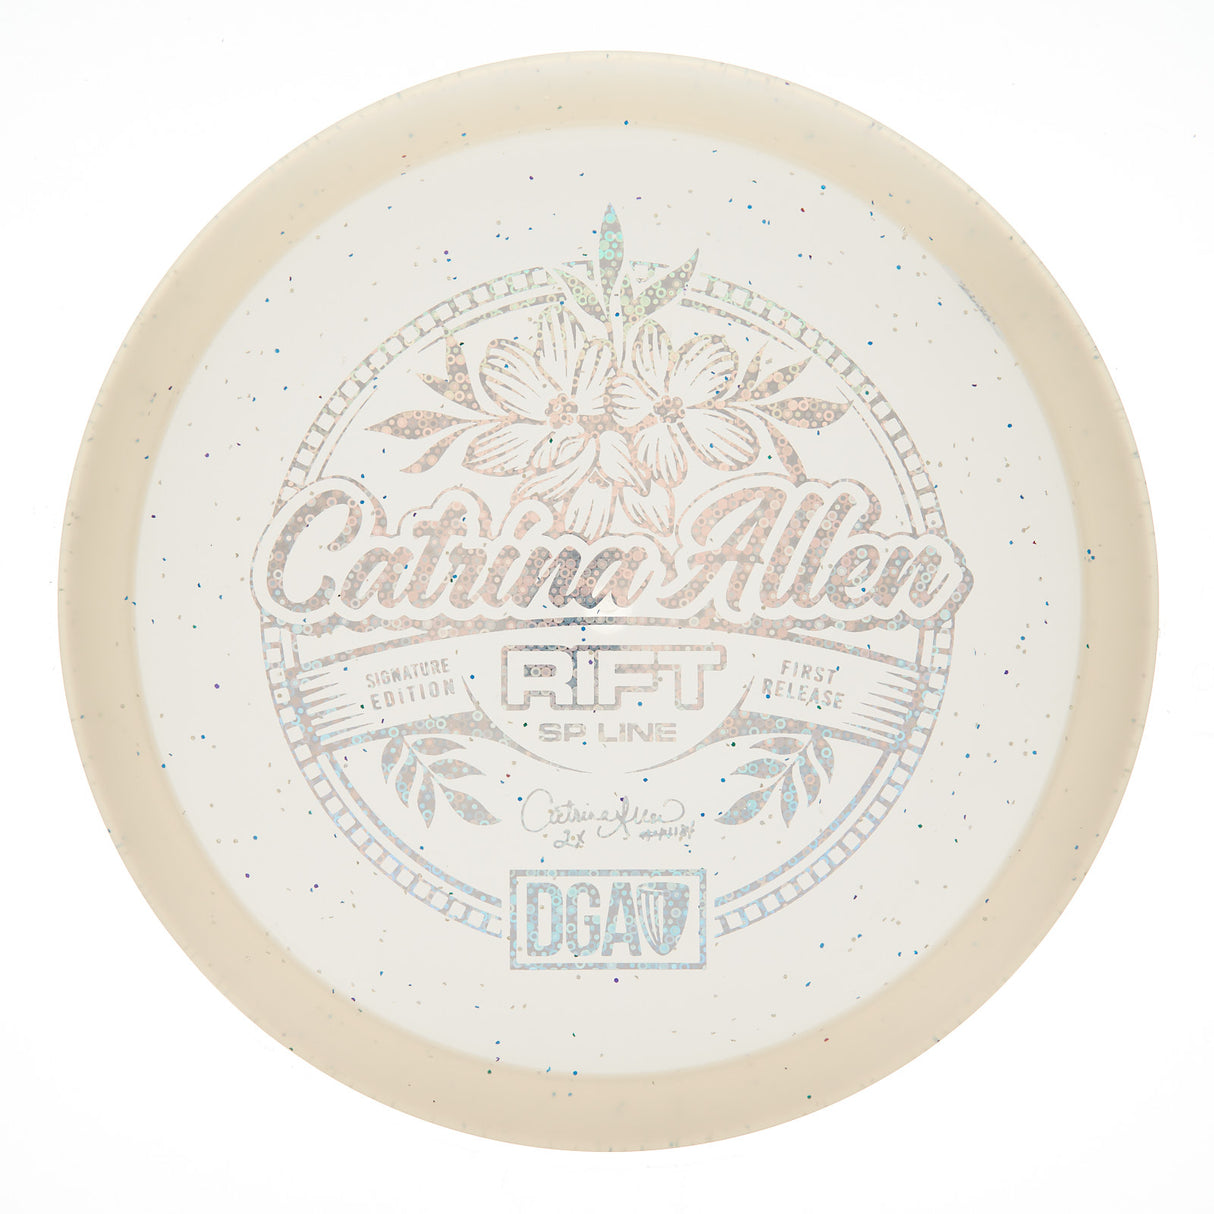 DGA Rift - Catrina Allen Signature Edition First Release SP Line 177g | Style 0003